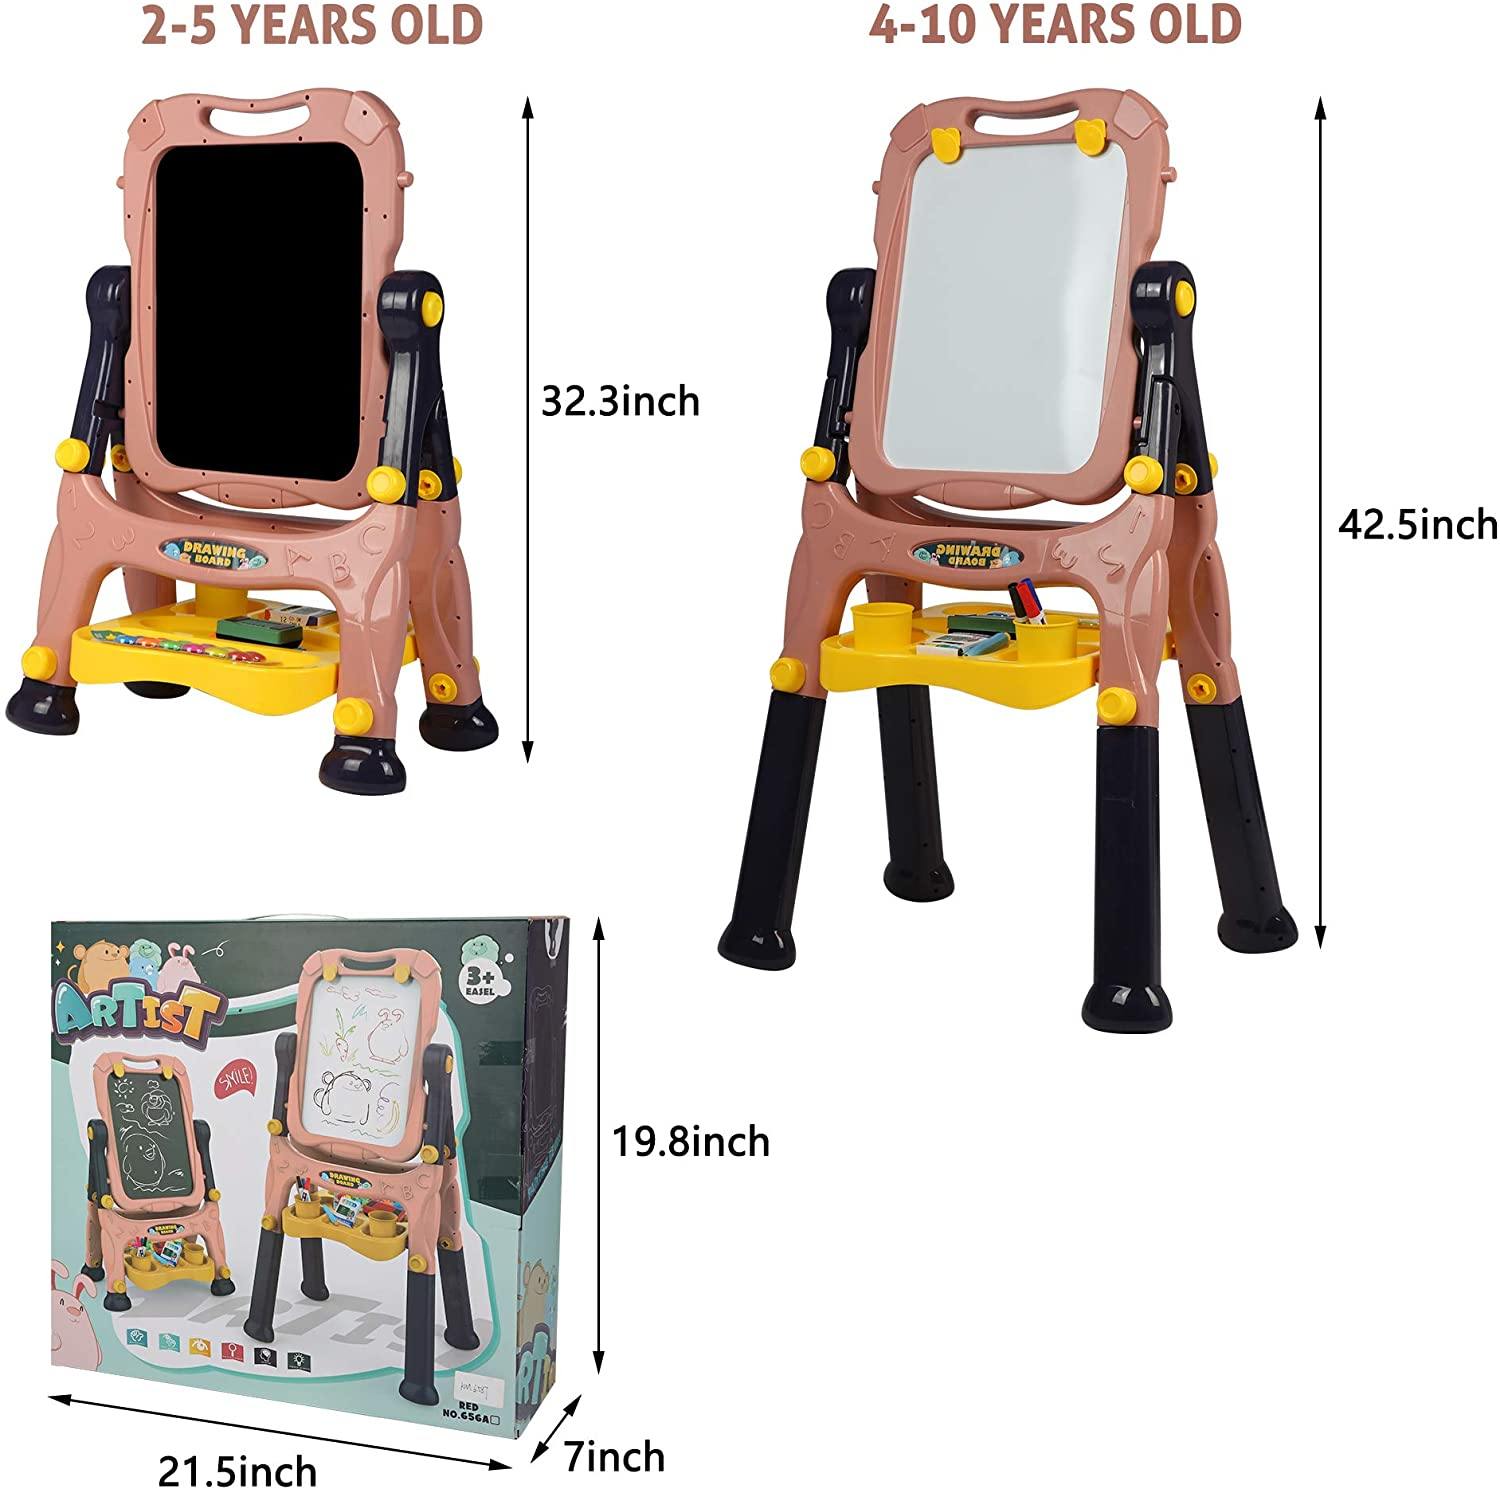 Kids Art Easel for Boys & Girls -Double Sided Standing Art Drawing Board- with Two Height Adjustable- Chalkboard and Magnetic Dry Erase Board, Pink - Bosonshop